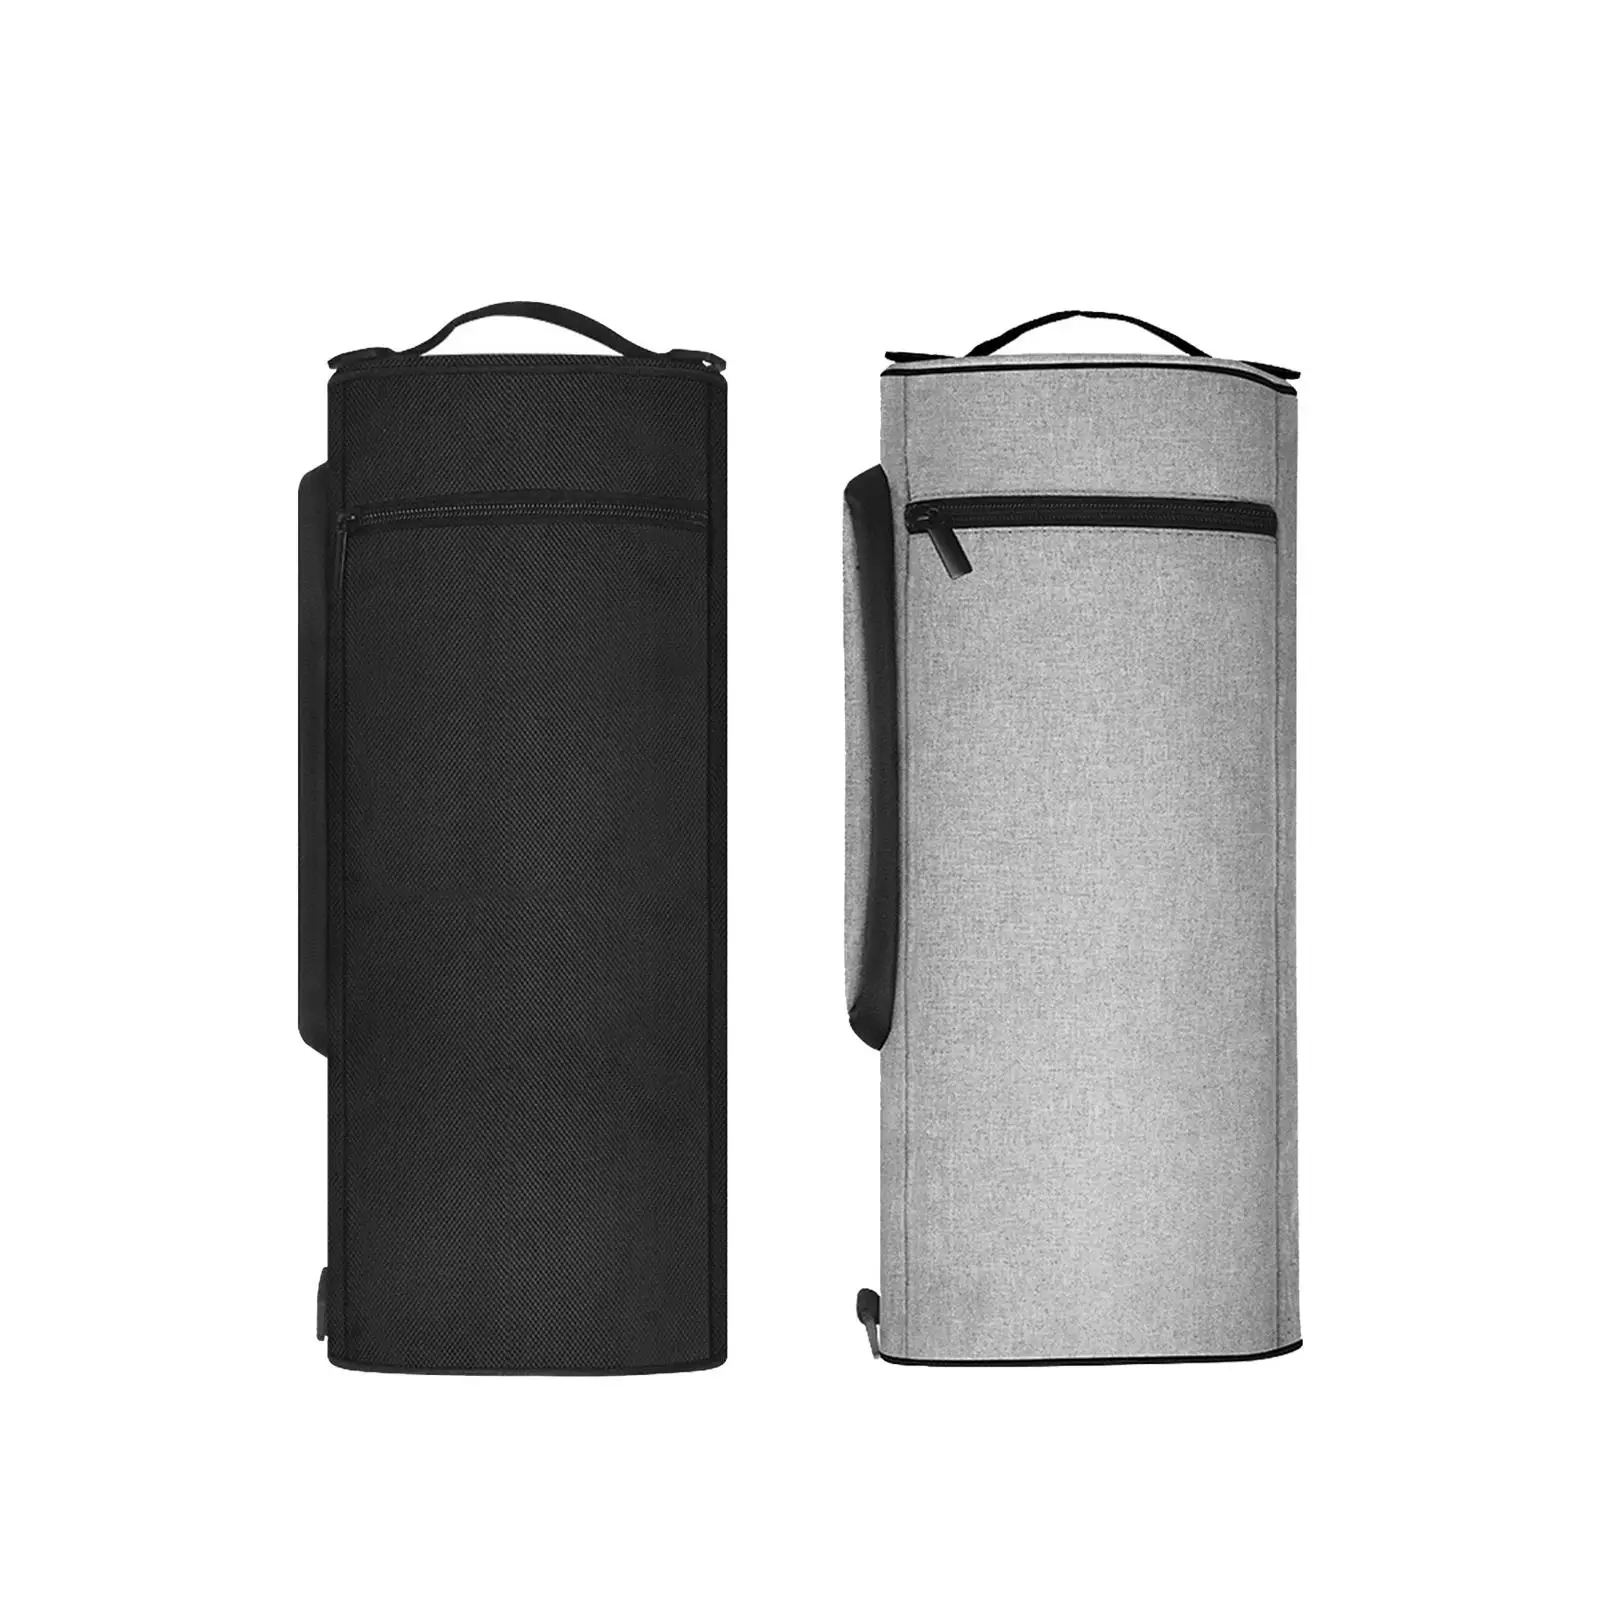 Oxford Cloth Golf Coolers Bag Insulated Coolers Sleeve Beer Sleeve Insulated Coolers Bag for Camping